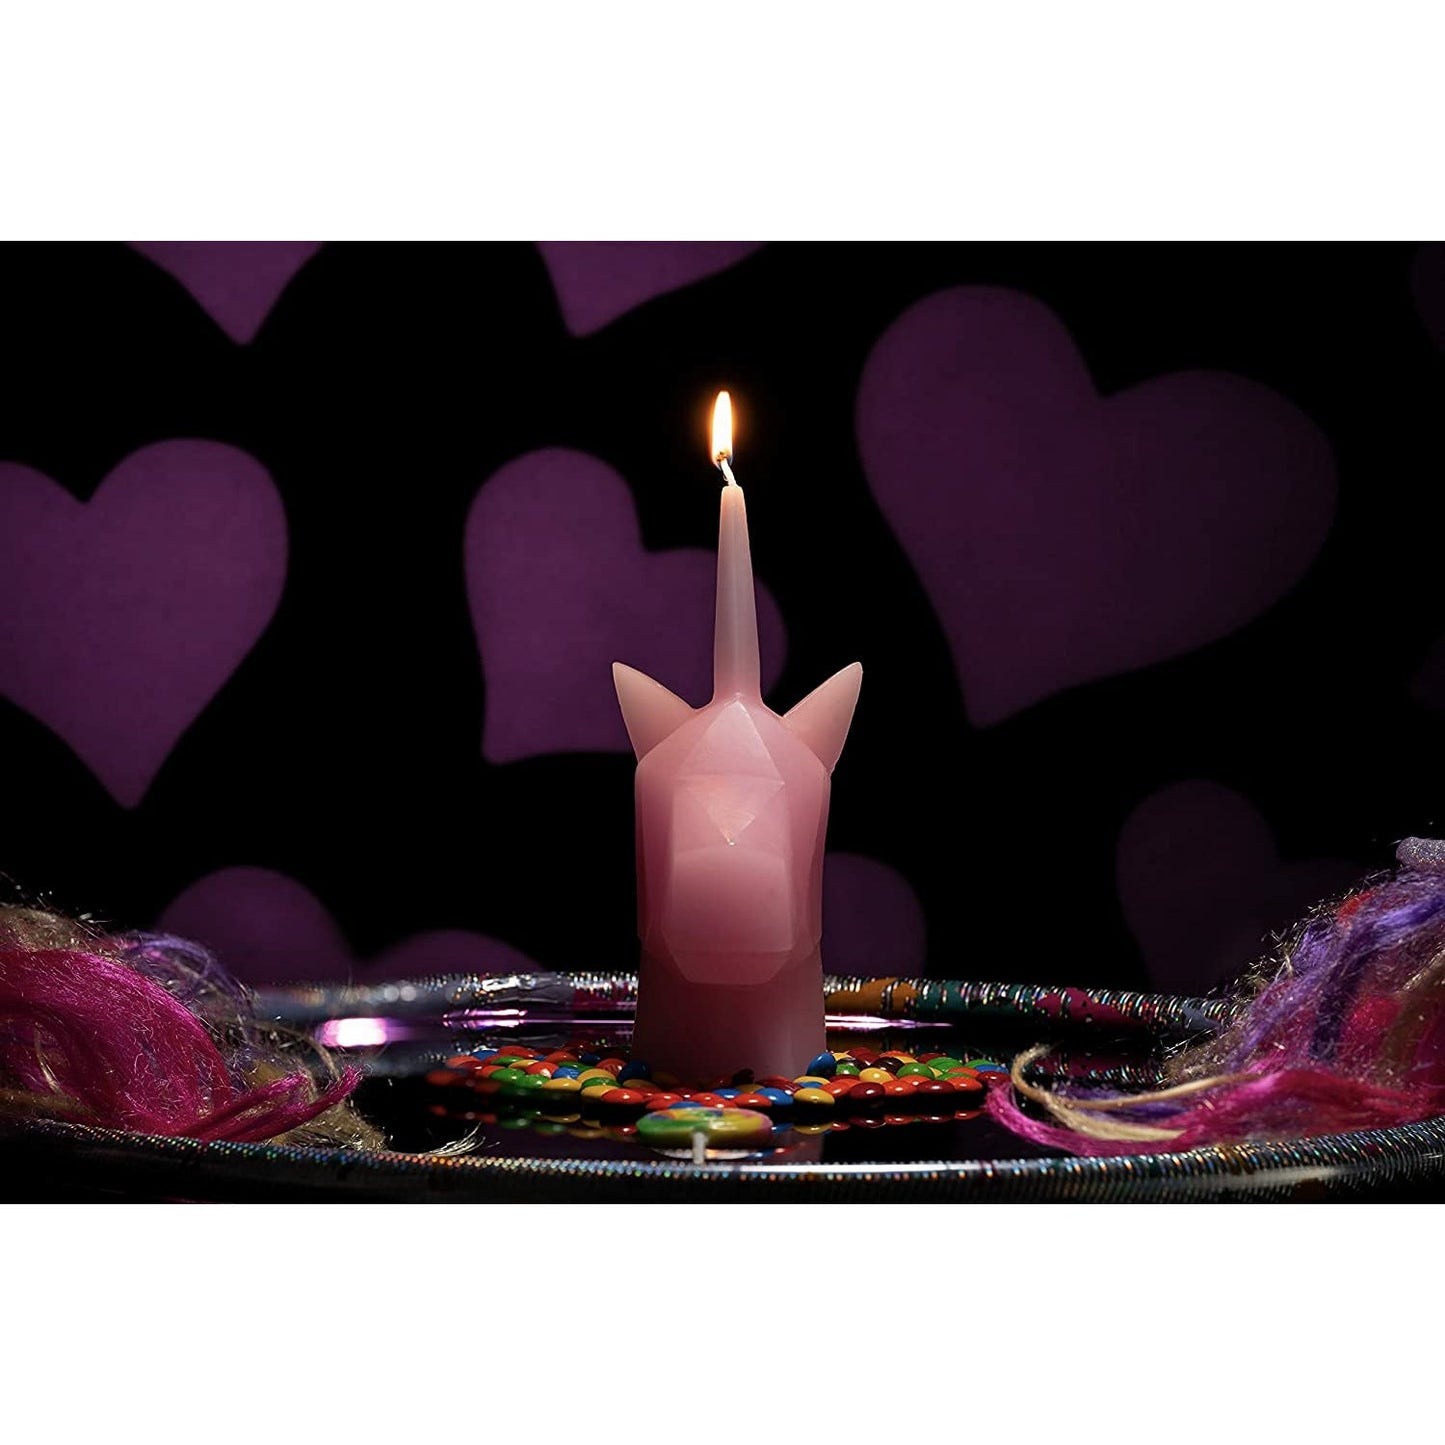 GUTE Pink Unicorn Head Candle 8" H, for Kids, Unicorn Lovers, Unique Unicorn Candle, Unicorn Gifts, Animal Candle, Burns up to 6.5 Hours! by Gute Decor